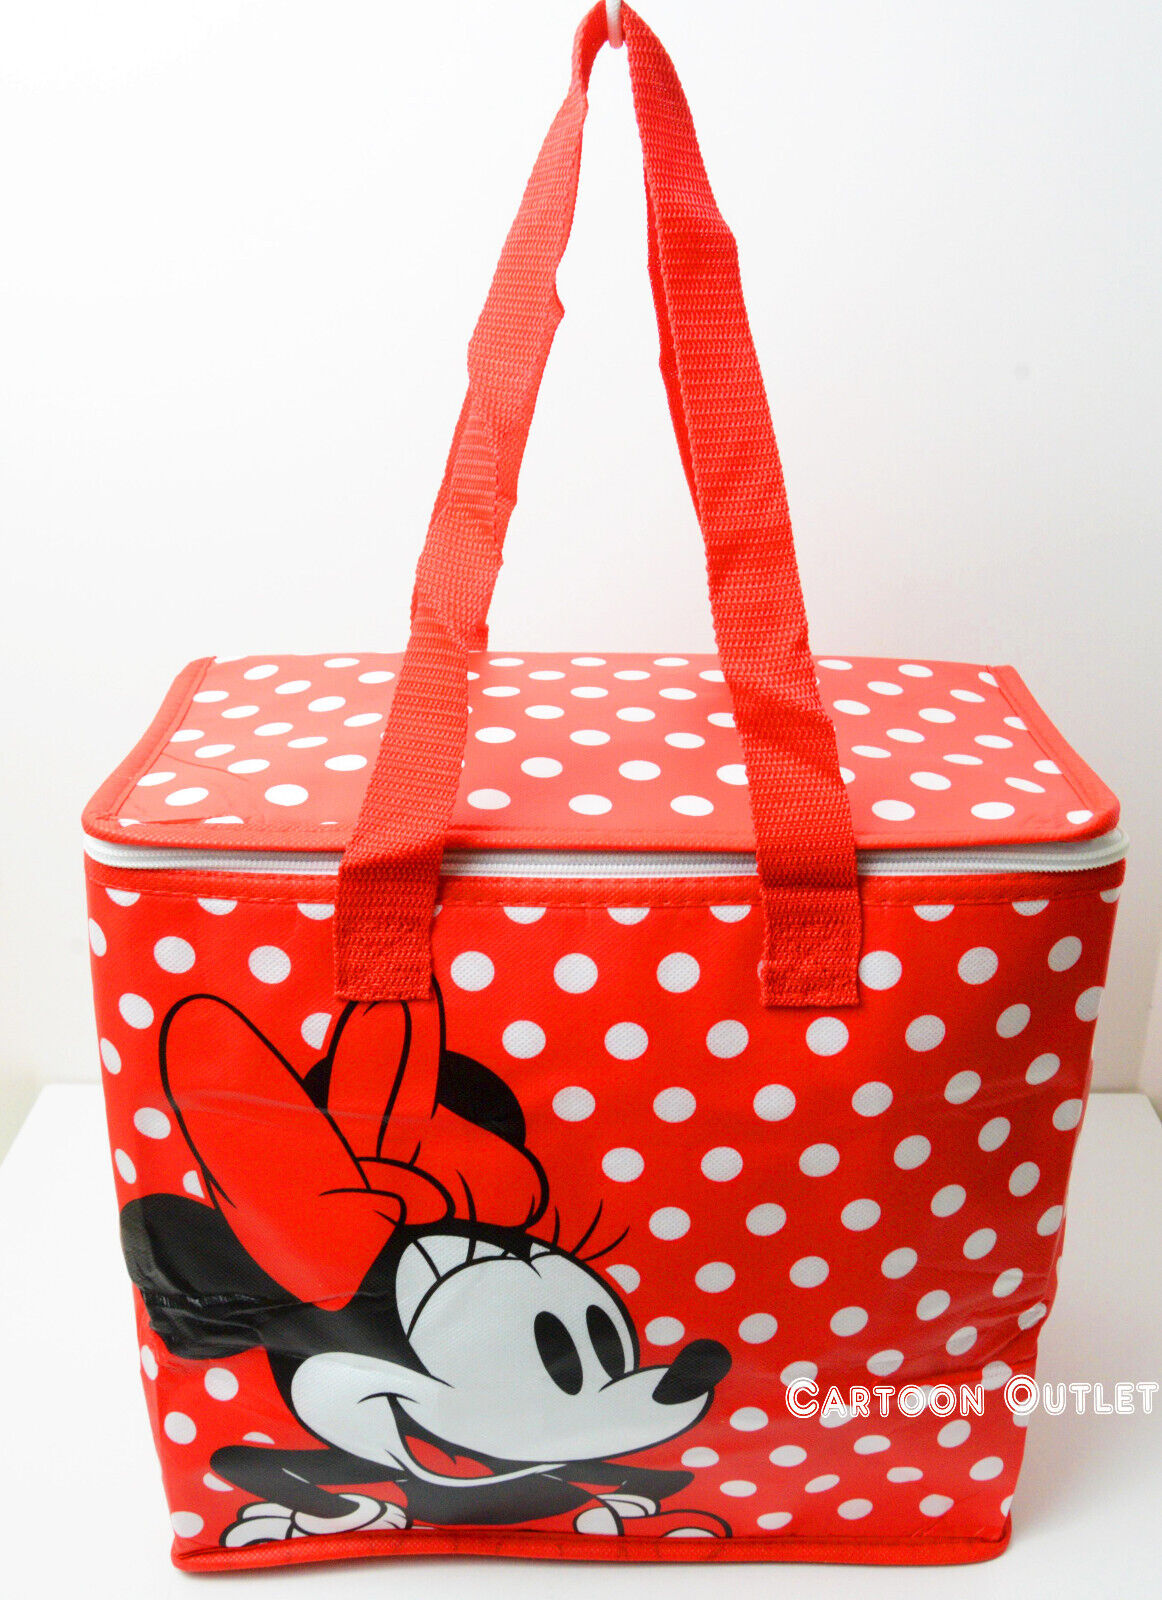 Disney Minnie Mouse Insulated Food Delivery Zippered Tote Bag Birthday Gift Red